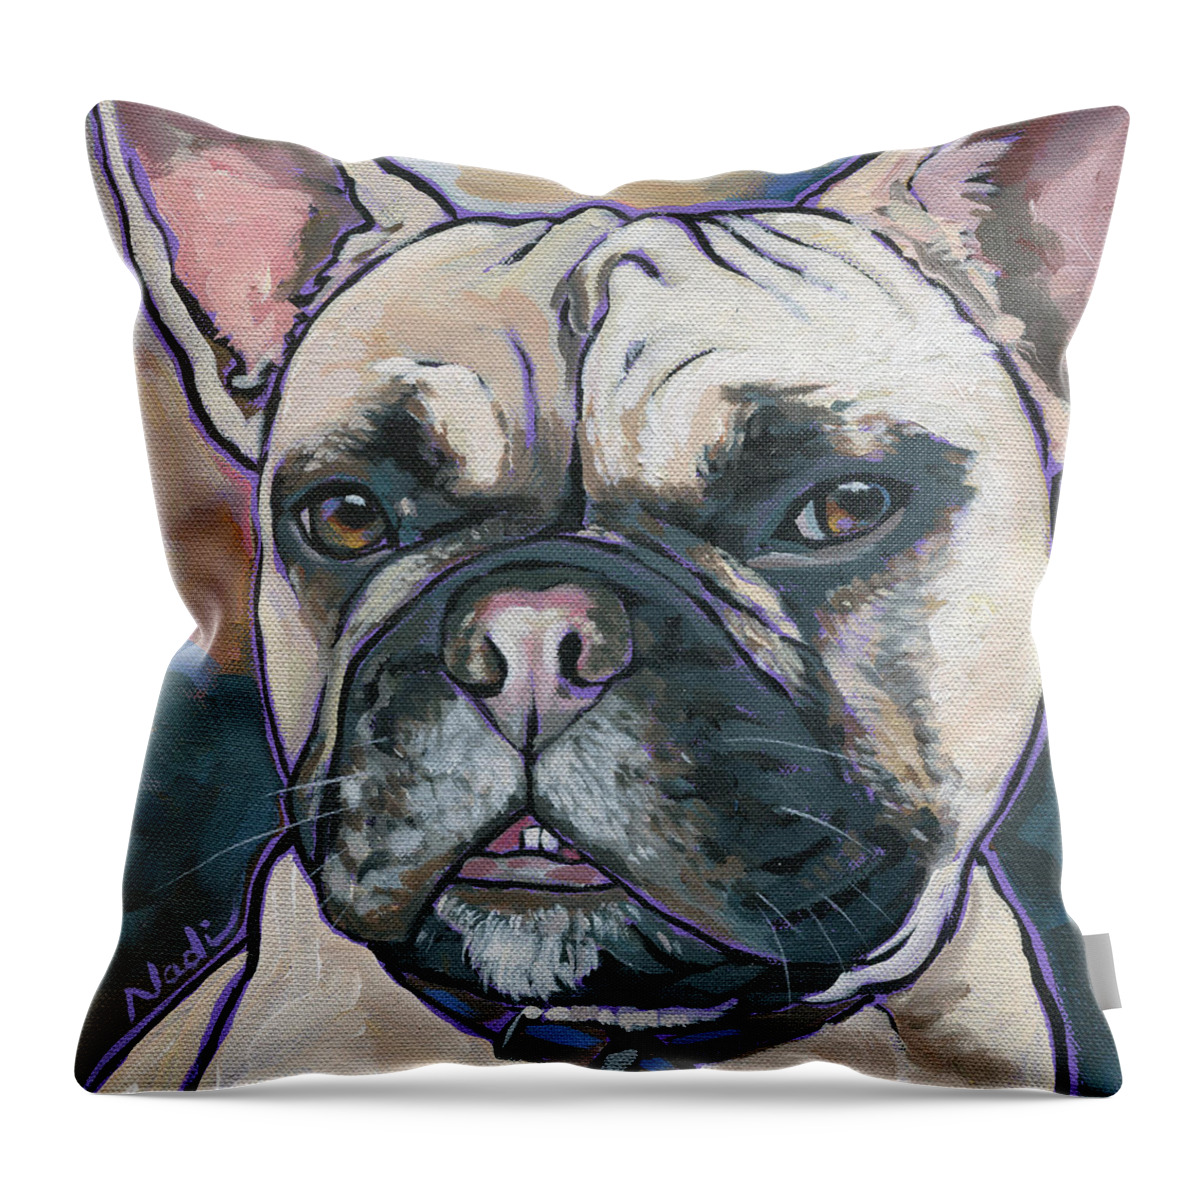 French Bulldog Throw Pillow featuring the painting Opie by Nadi Spencer